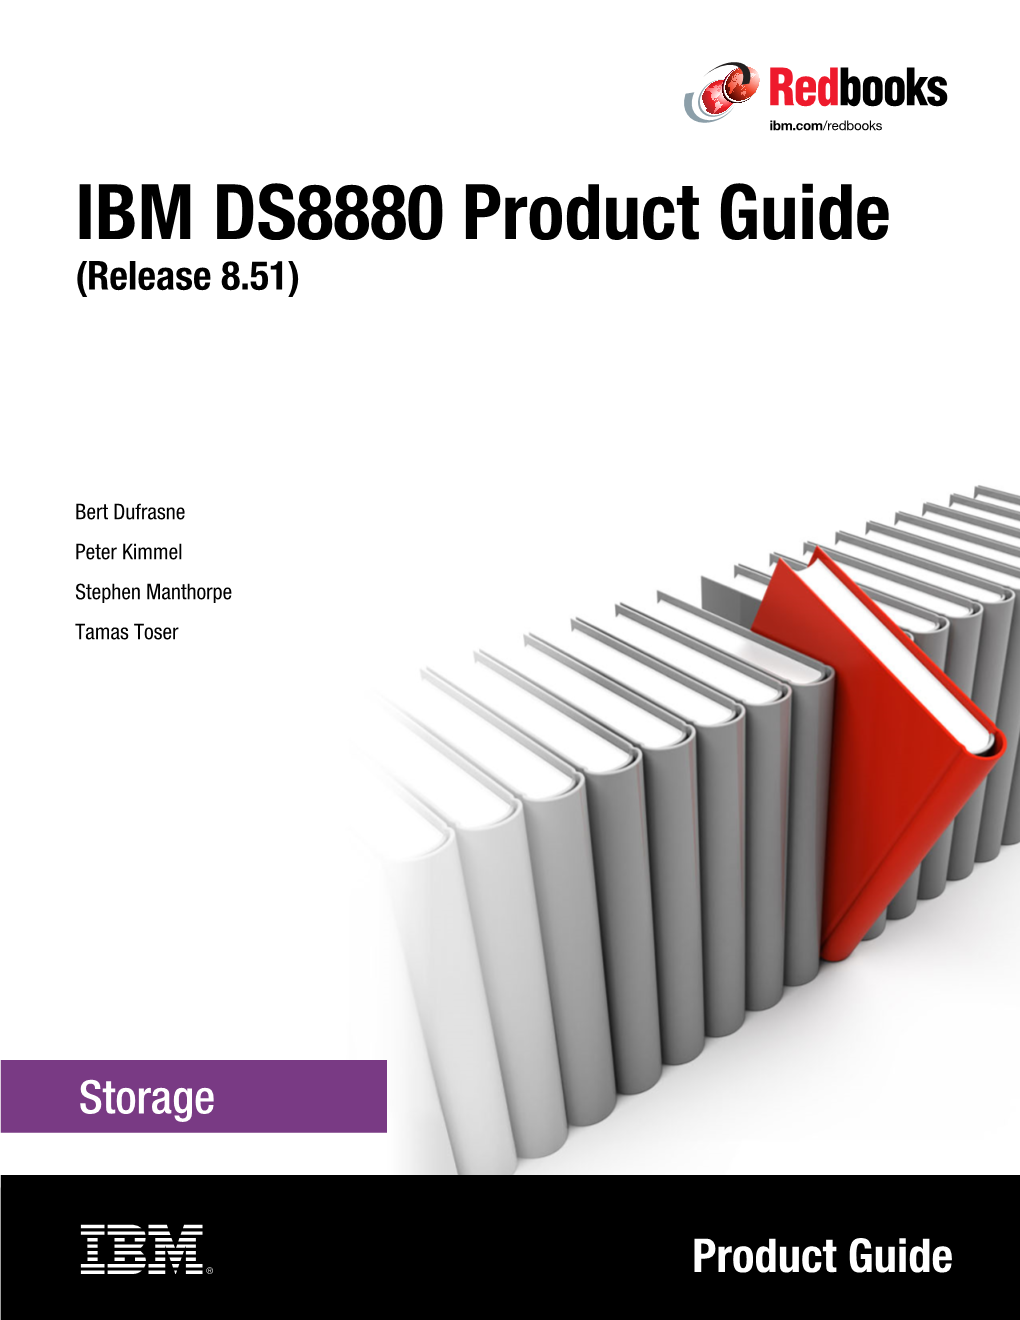 IBM DS8880 Product Guide (Release 8.51)